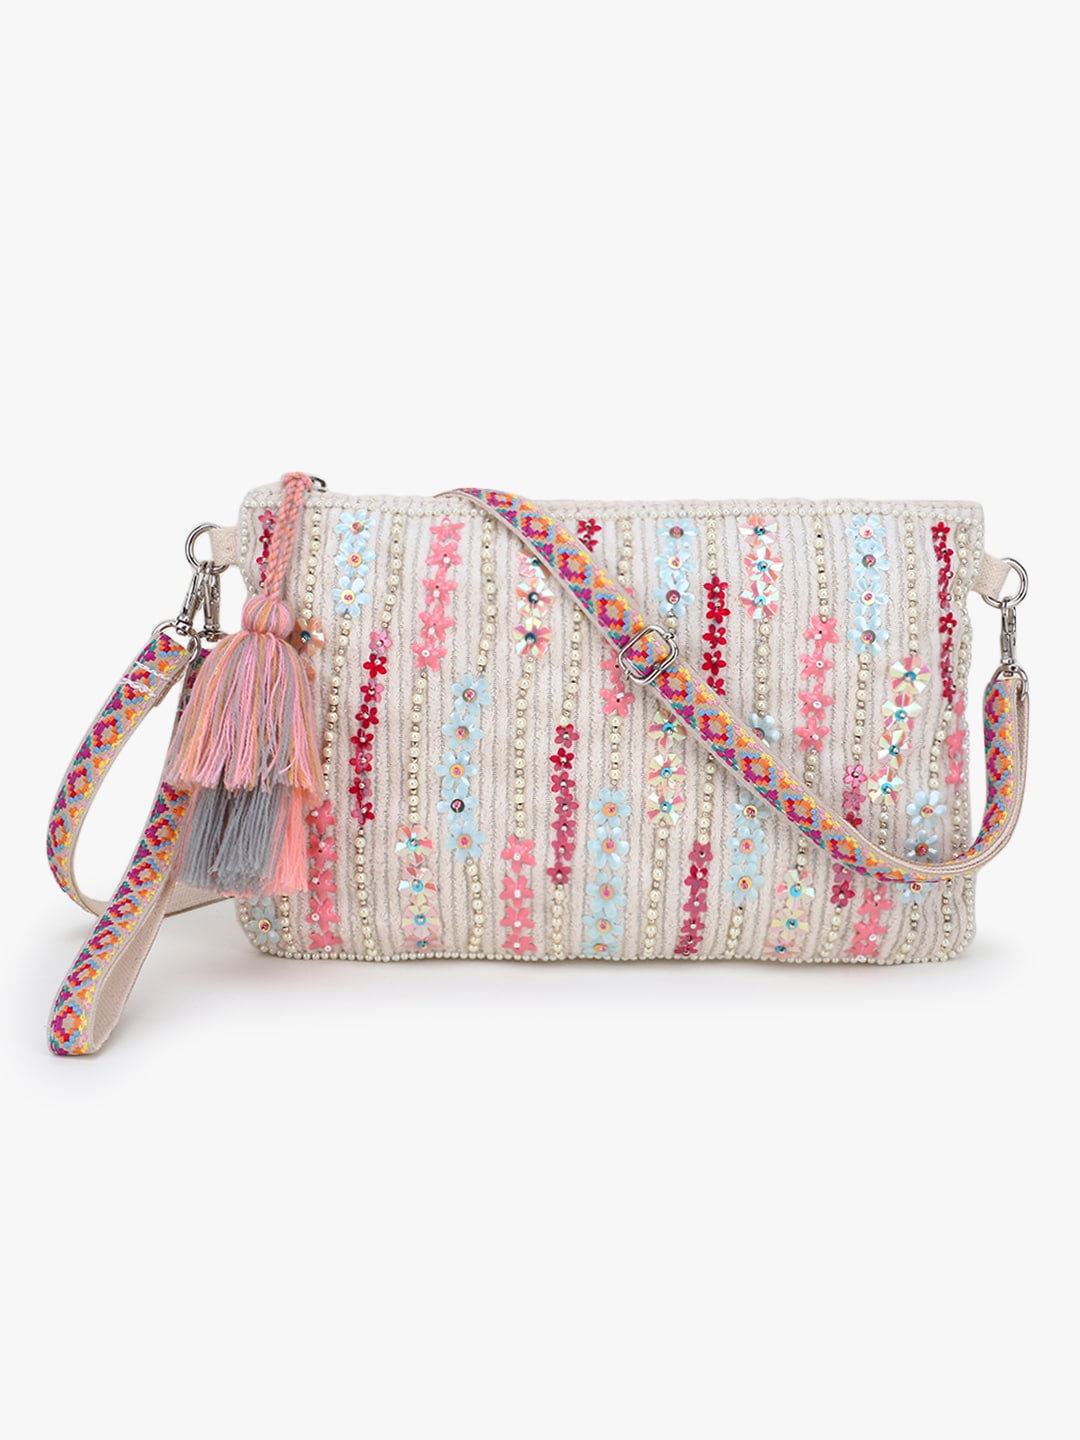 Anekaant Off-White Embellished Sling Bag Price in India